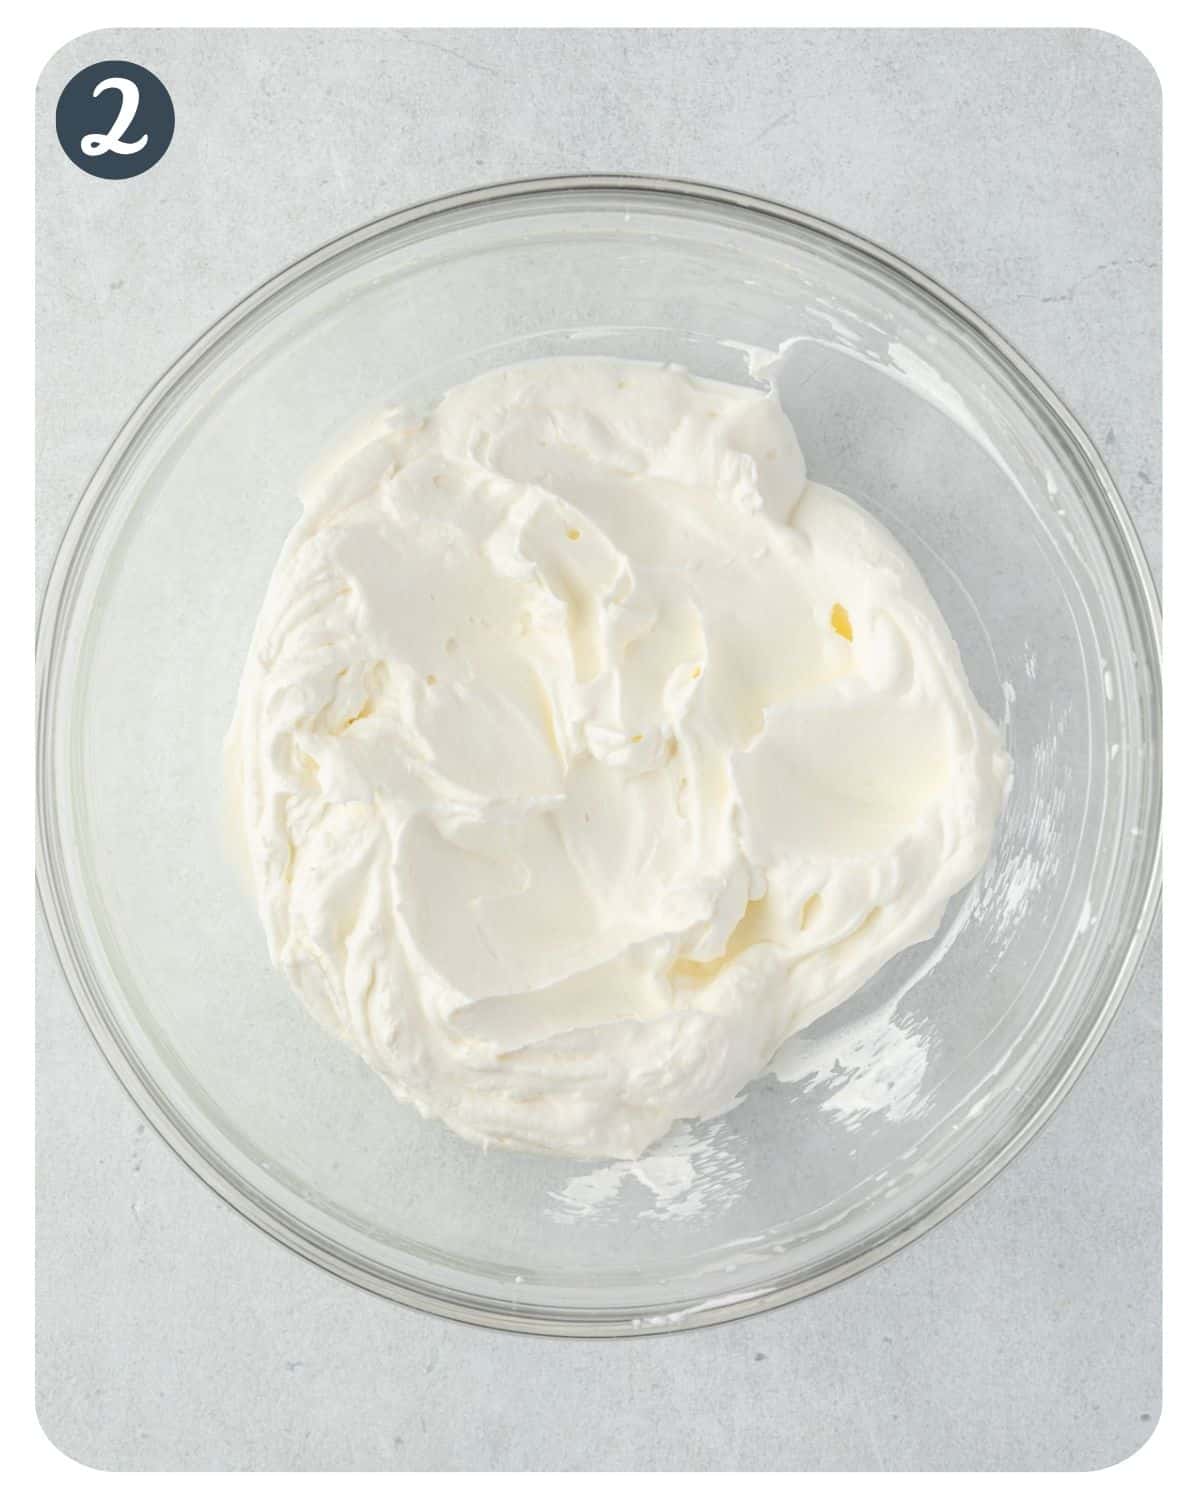 Whipped cream with stiff peaks in a glass bowl.